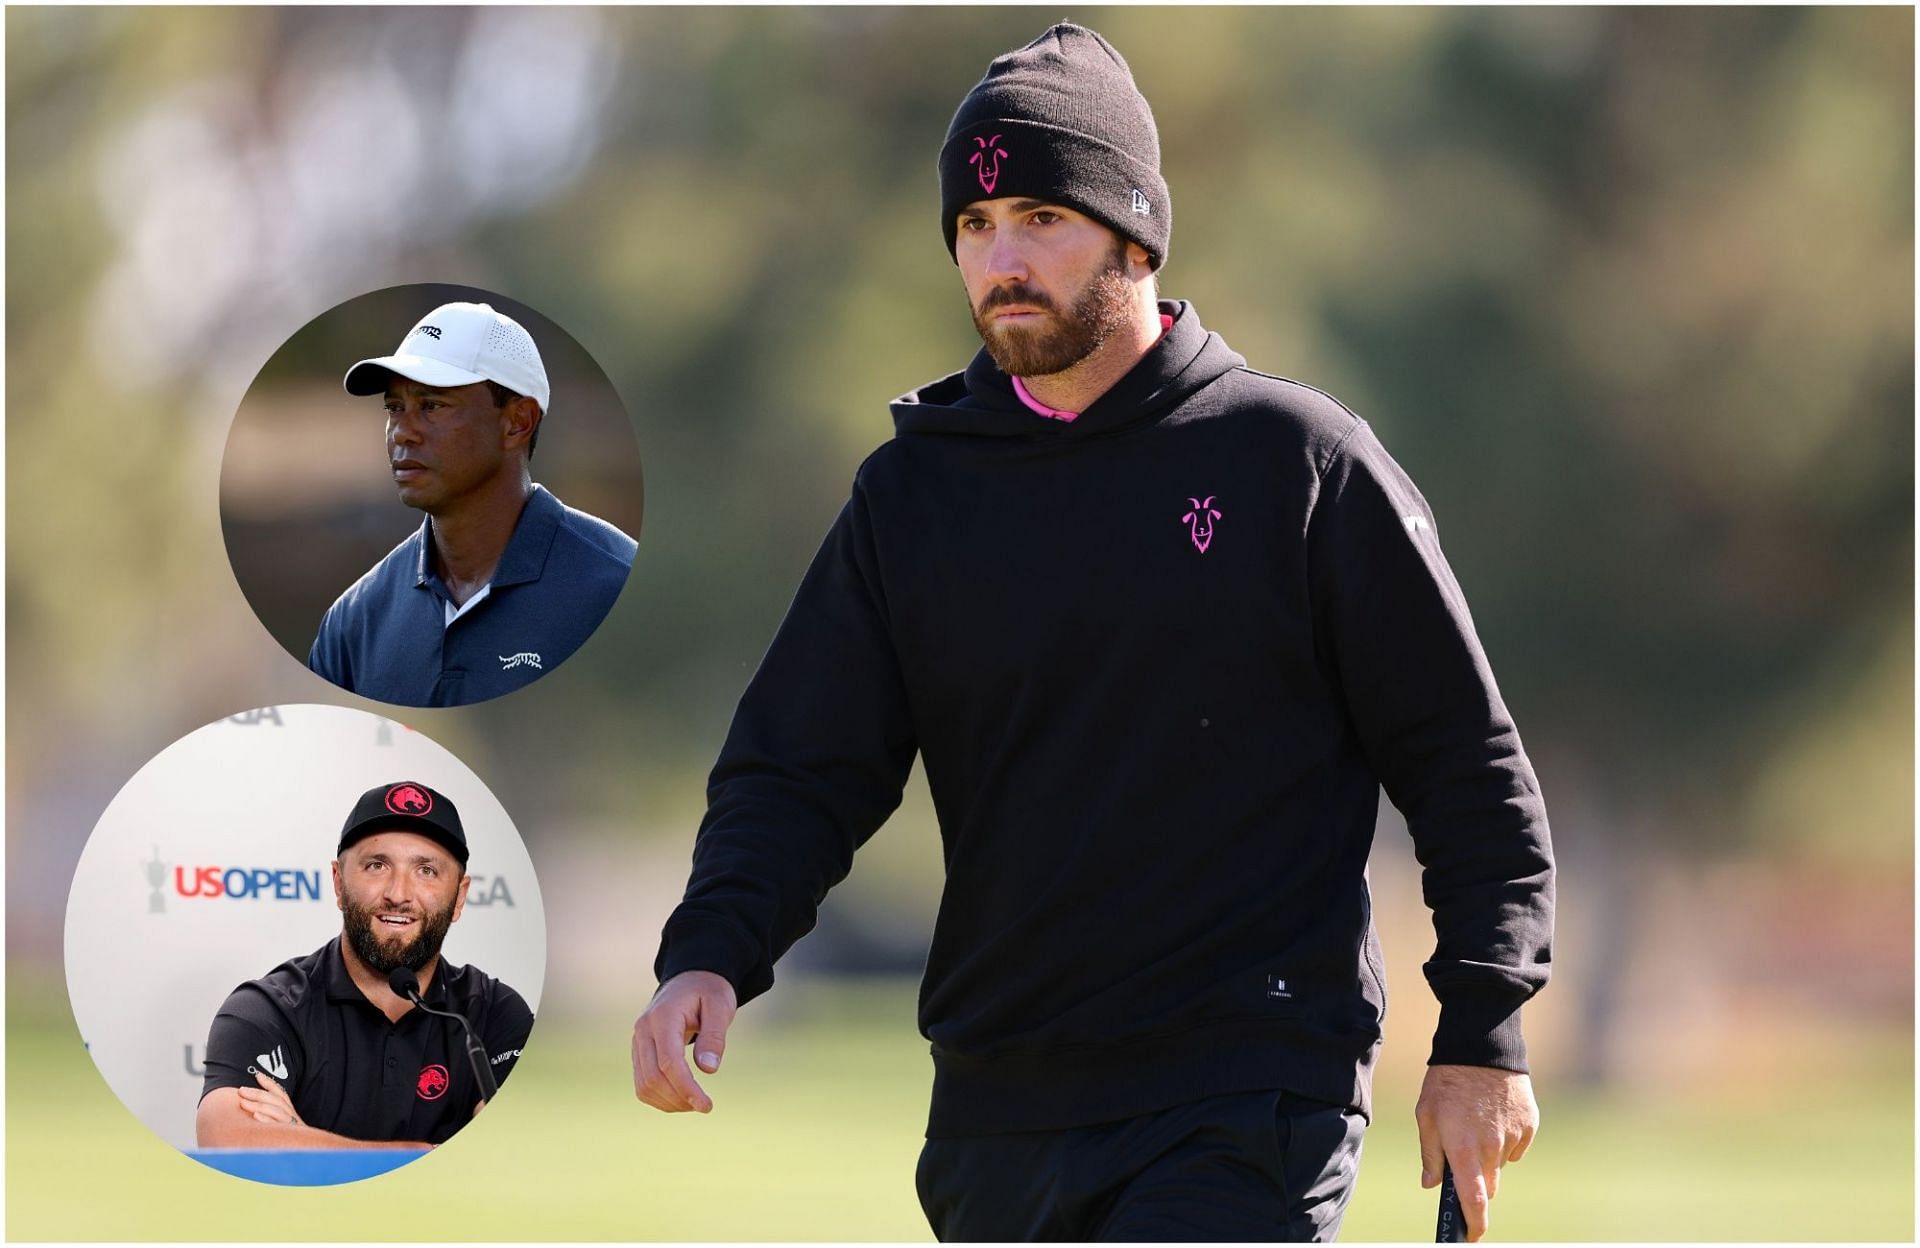 Matthew Wolff, Jon Rahm and Tiger Woods (Images: All from Getty)